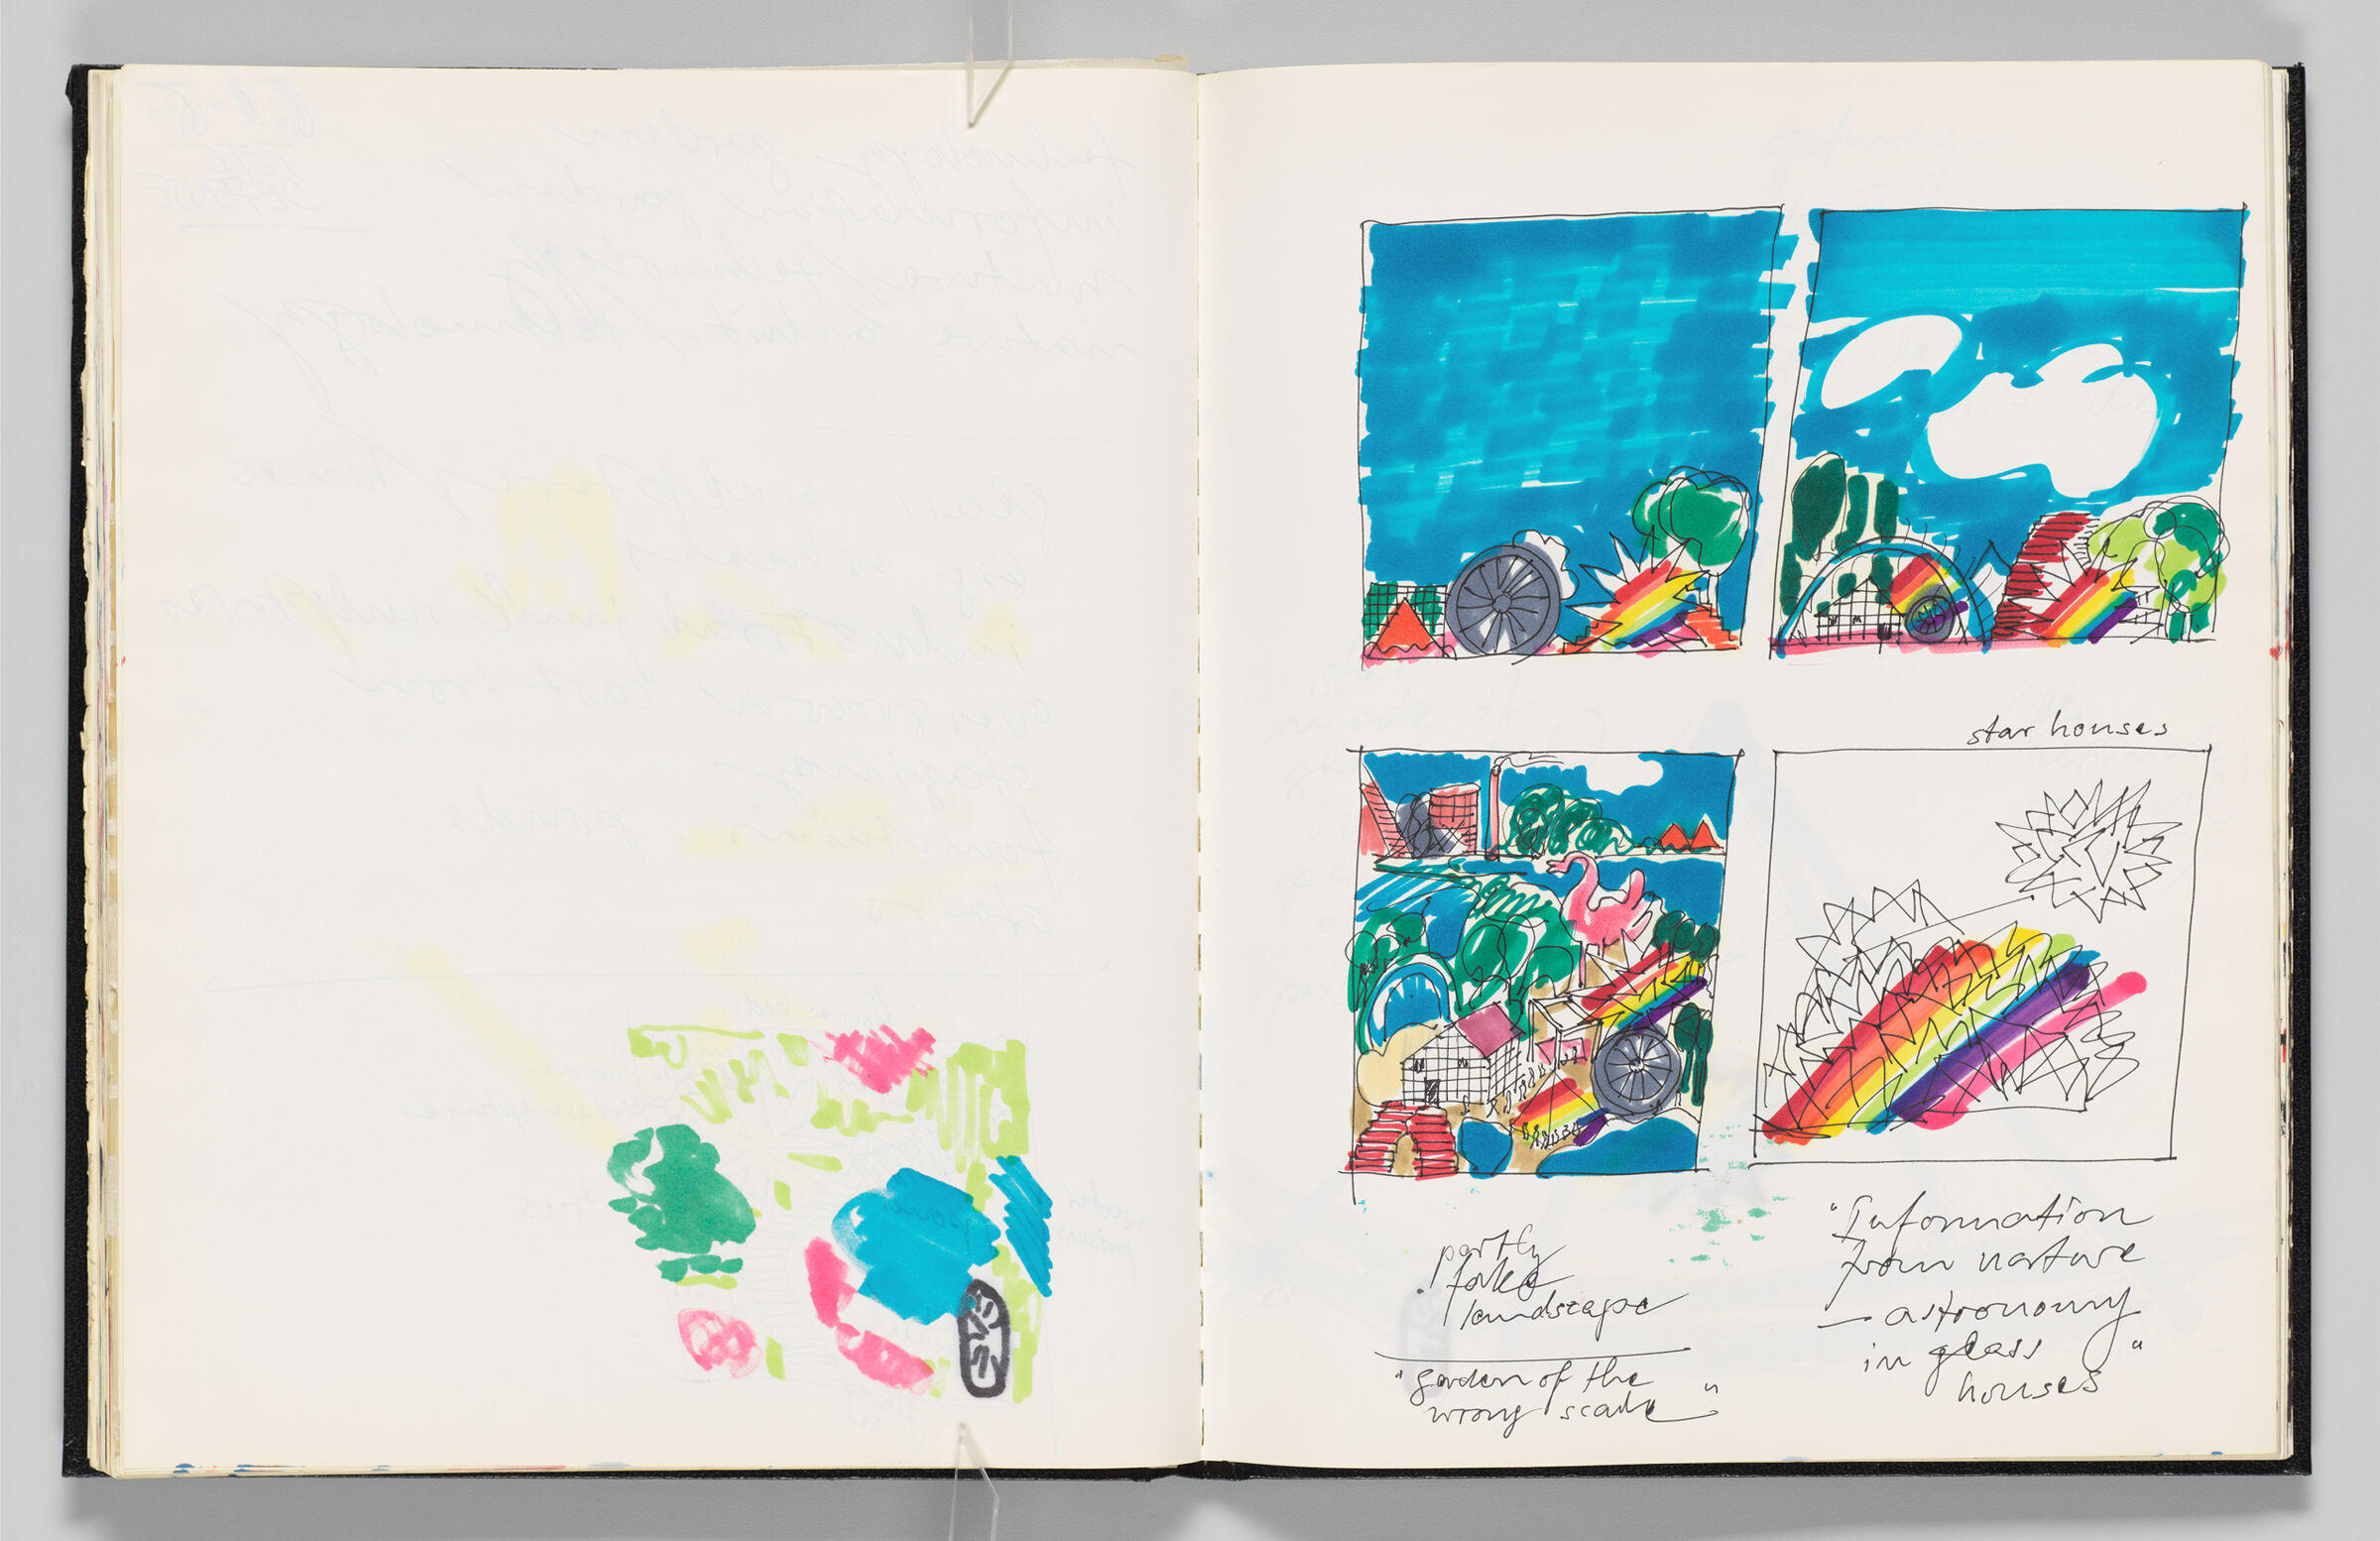 Untitled (Bleed-Through Of Previous Page, Left Page); Untitled (Garden Installation Designs, Right Page)